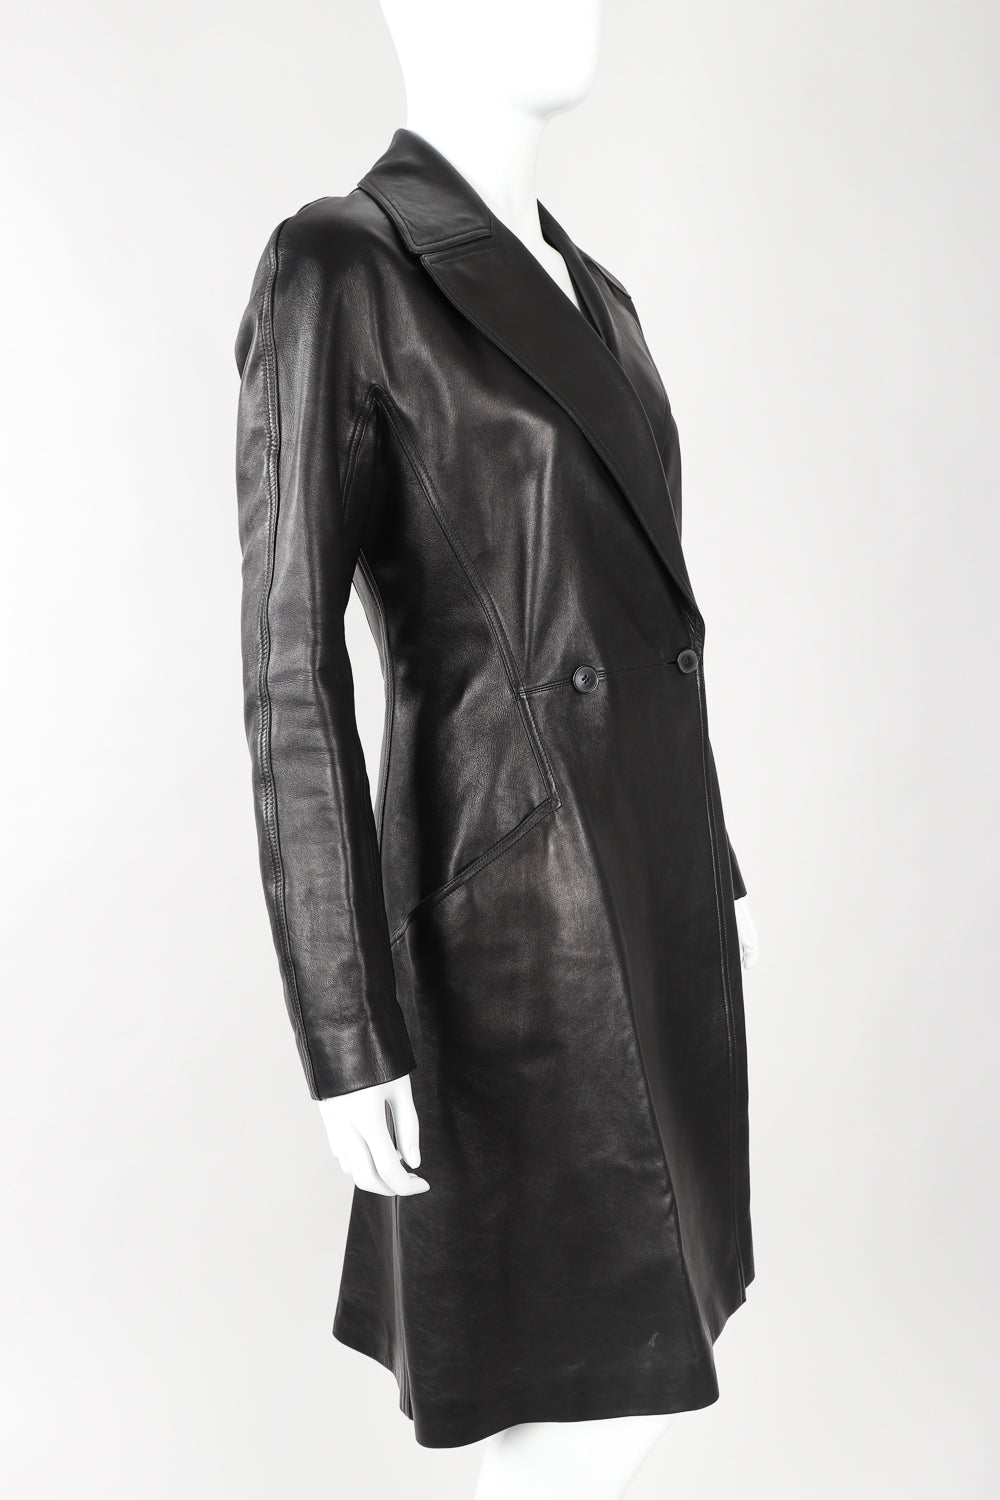 Recess Designer Consignment Vintage Alaia Wide Lapel Leather Trench Coat Los Angeles Resale